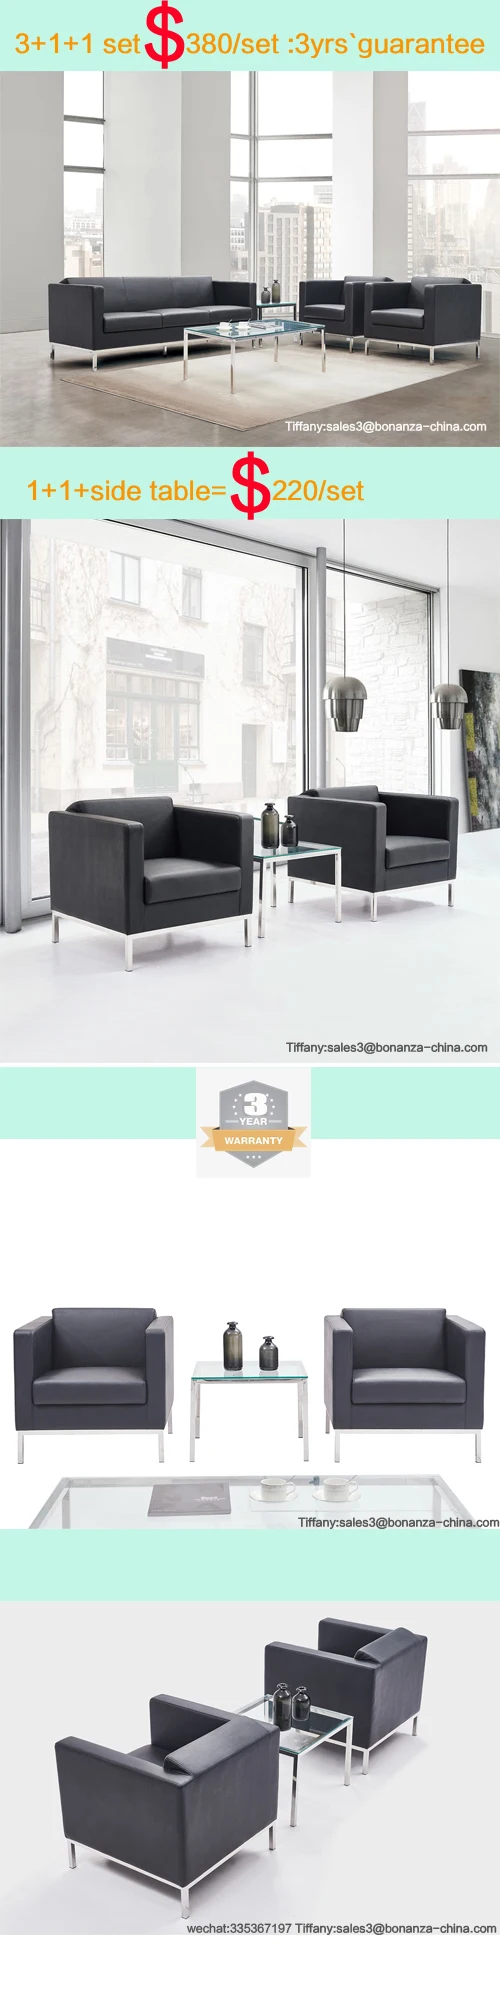 Hotel modern lobby sofa design with stainless steel legs